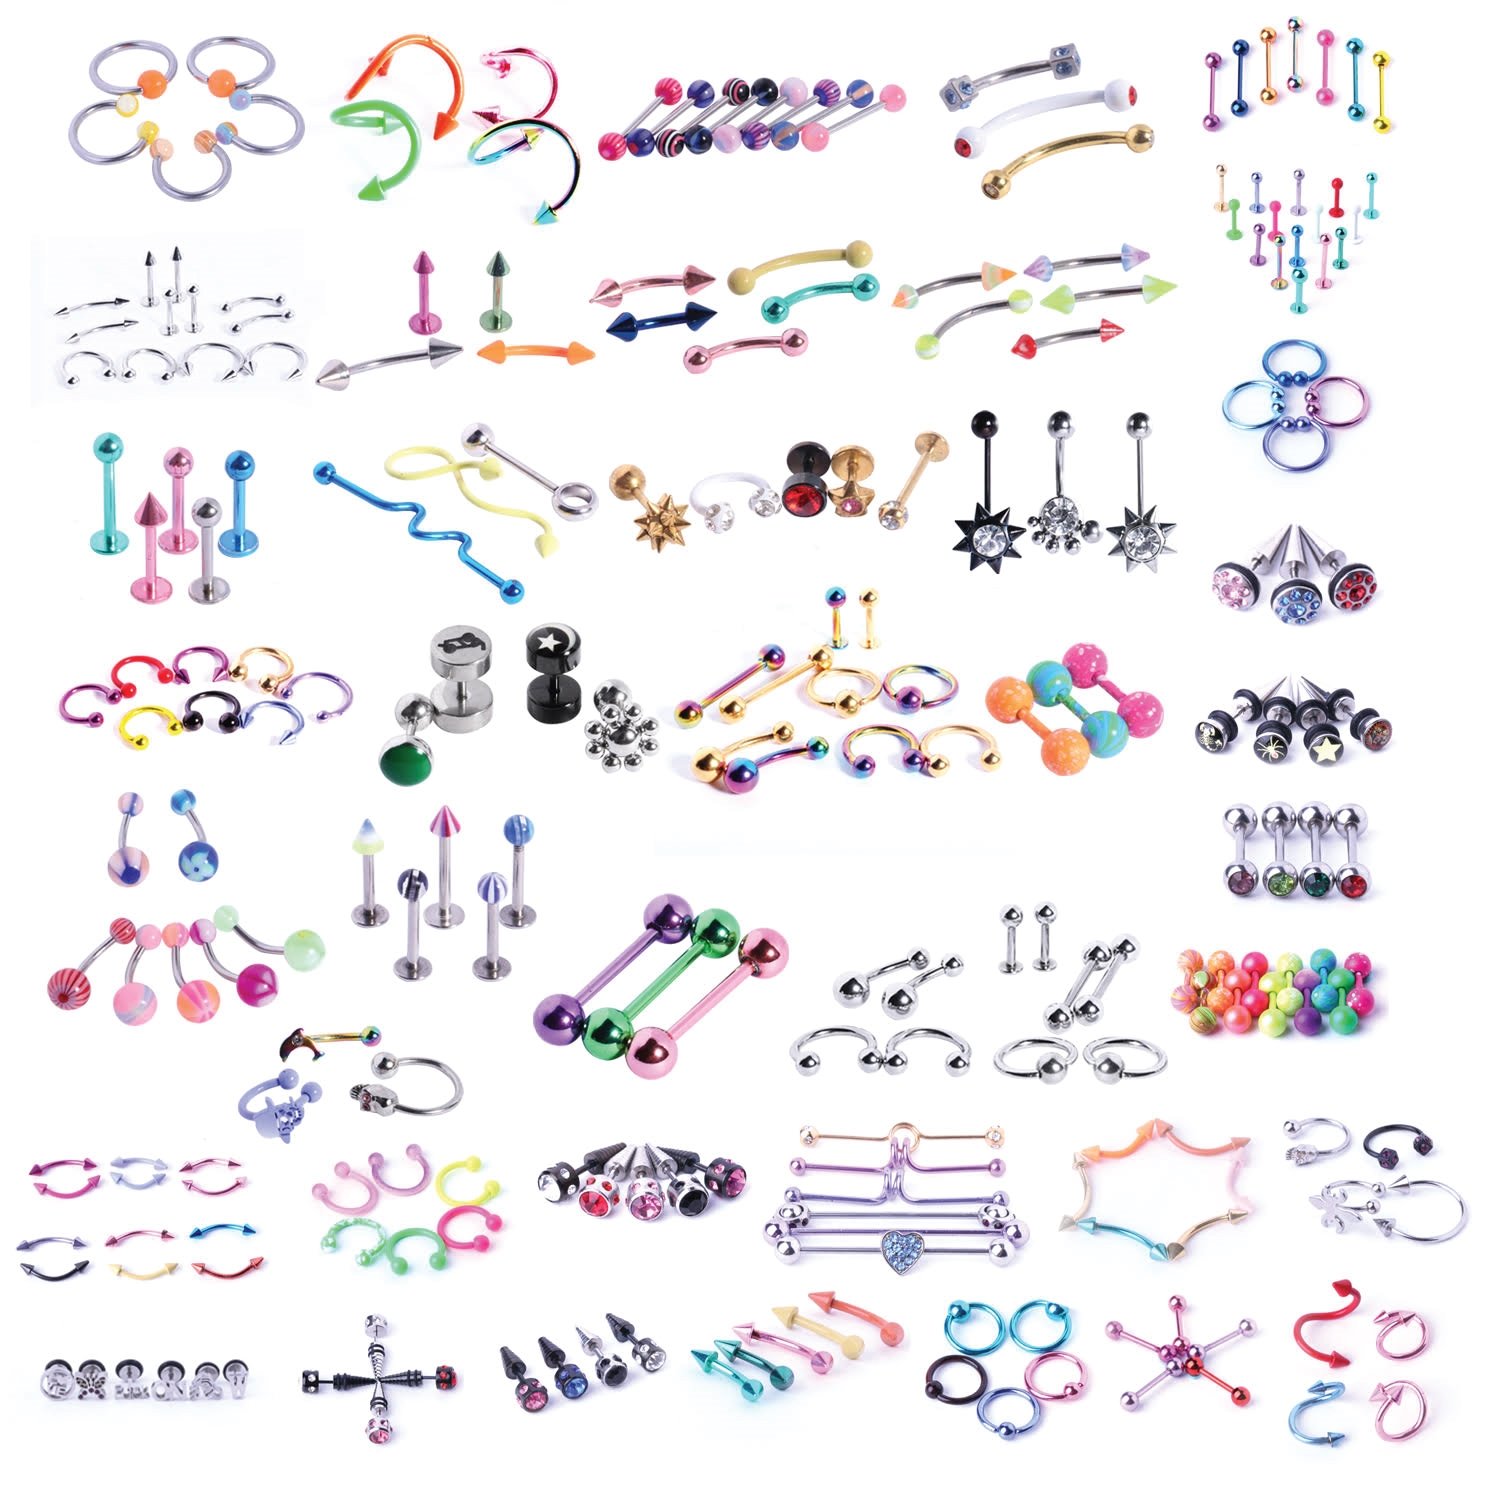 BodyJ4You 120PC Body Piercing Random Jewelry Aftercare Bump Treatment | CBR BCR Rings Barbells Studs Screws Curved Bars | Belly Button Cartilage Tragus Nose Septum Tongue | 14G 16G 18G Steel Bulk Mix